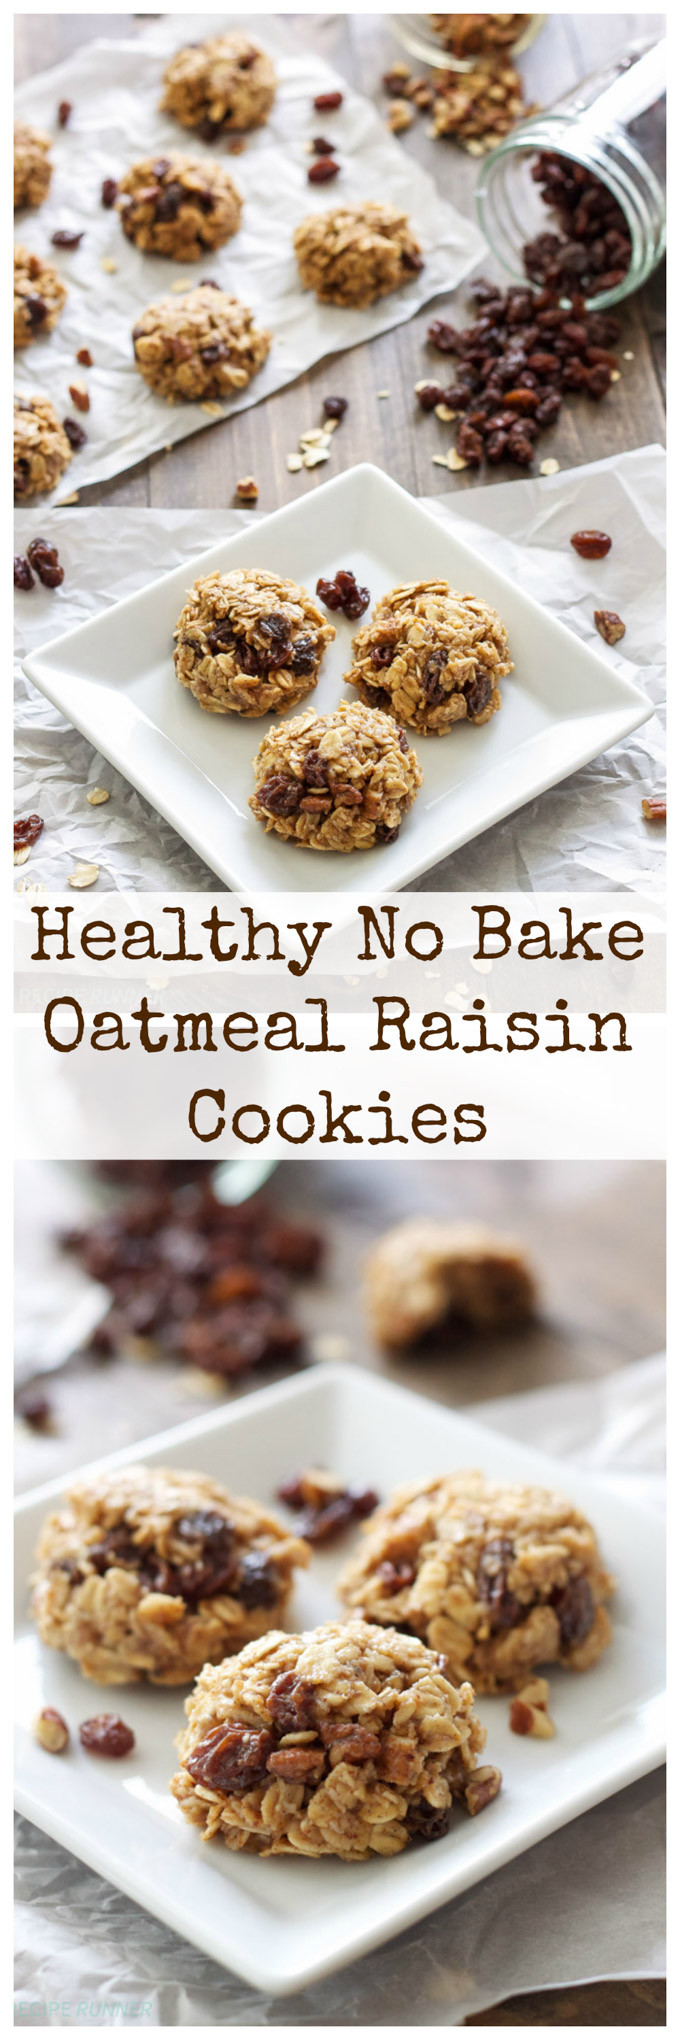 No Bake Oatmeal Cookies Healthy the top 20 Ideas About Healthy No Bake Oatmeal Raisin Cookies Recipe Runner